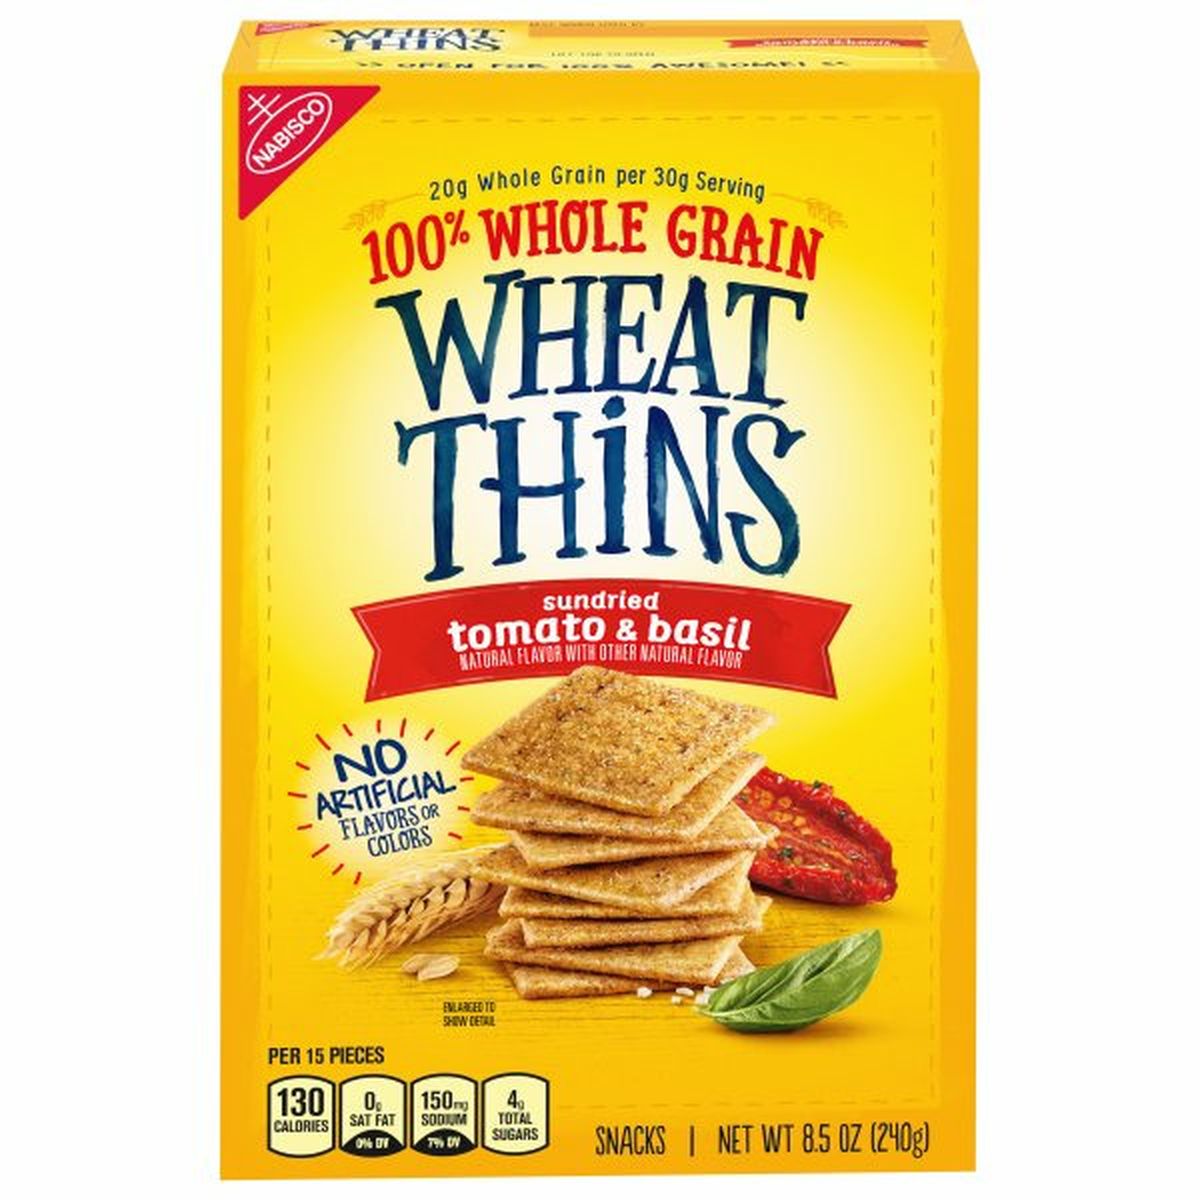 Calories in Wheat Thins Snacks, 100% Whole Grain, Sundried Tomato & Basil